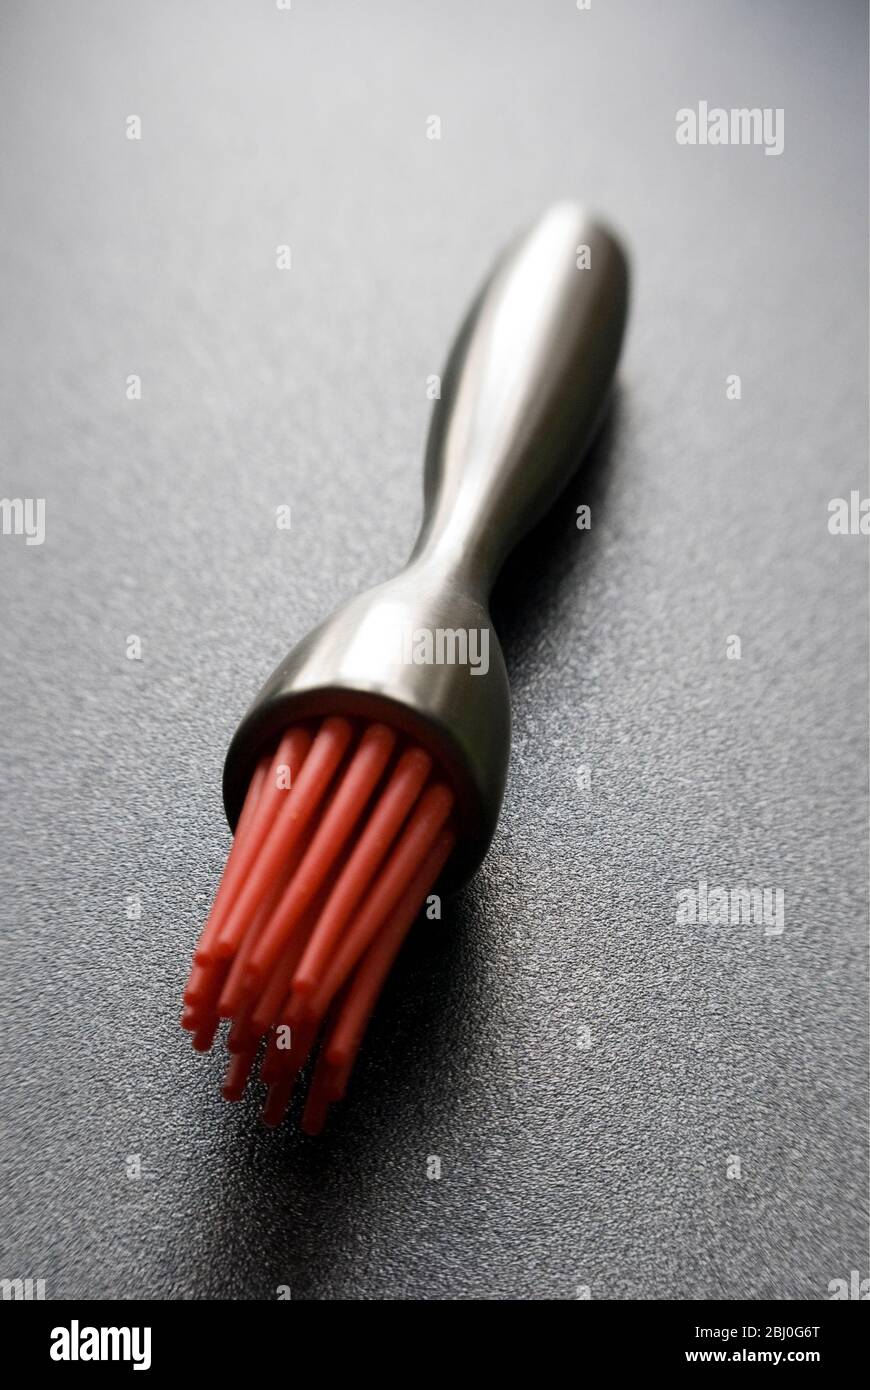 Modern pastry brush with red silicone 'bristles' on dark textured surface - Stock Photo